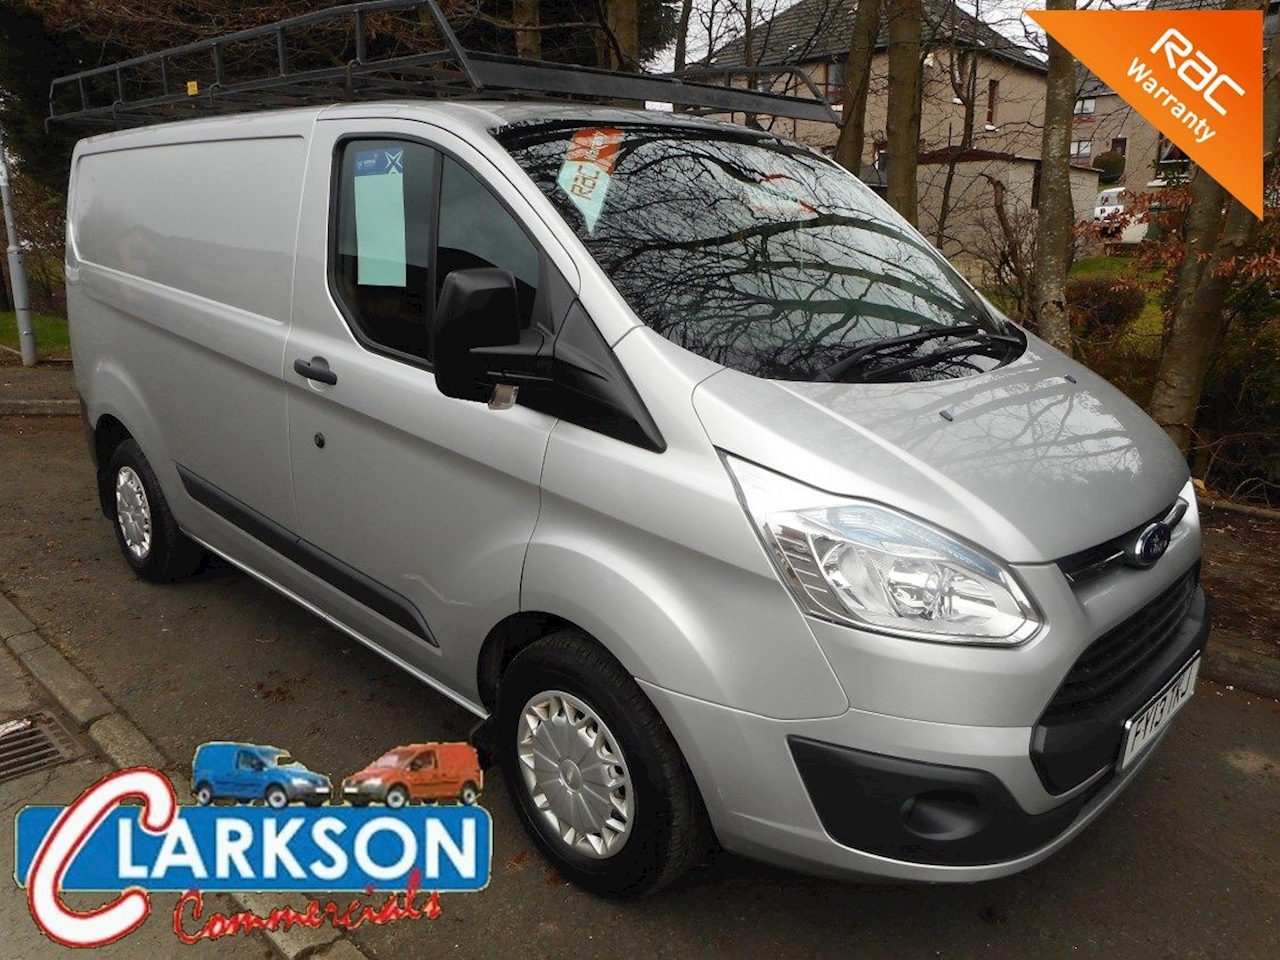 historisch Mevrouw expeditie Used 2013 Ford Transit Custom 270 SWB Trend, ex private owner hence NO VAT  For Sale (U3003) | Clarkson Commercials